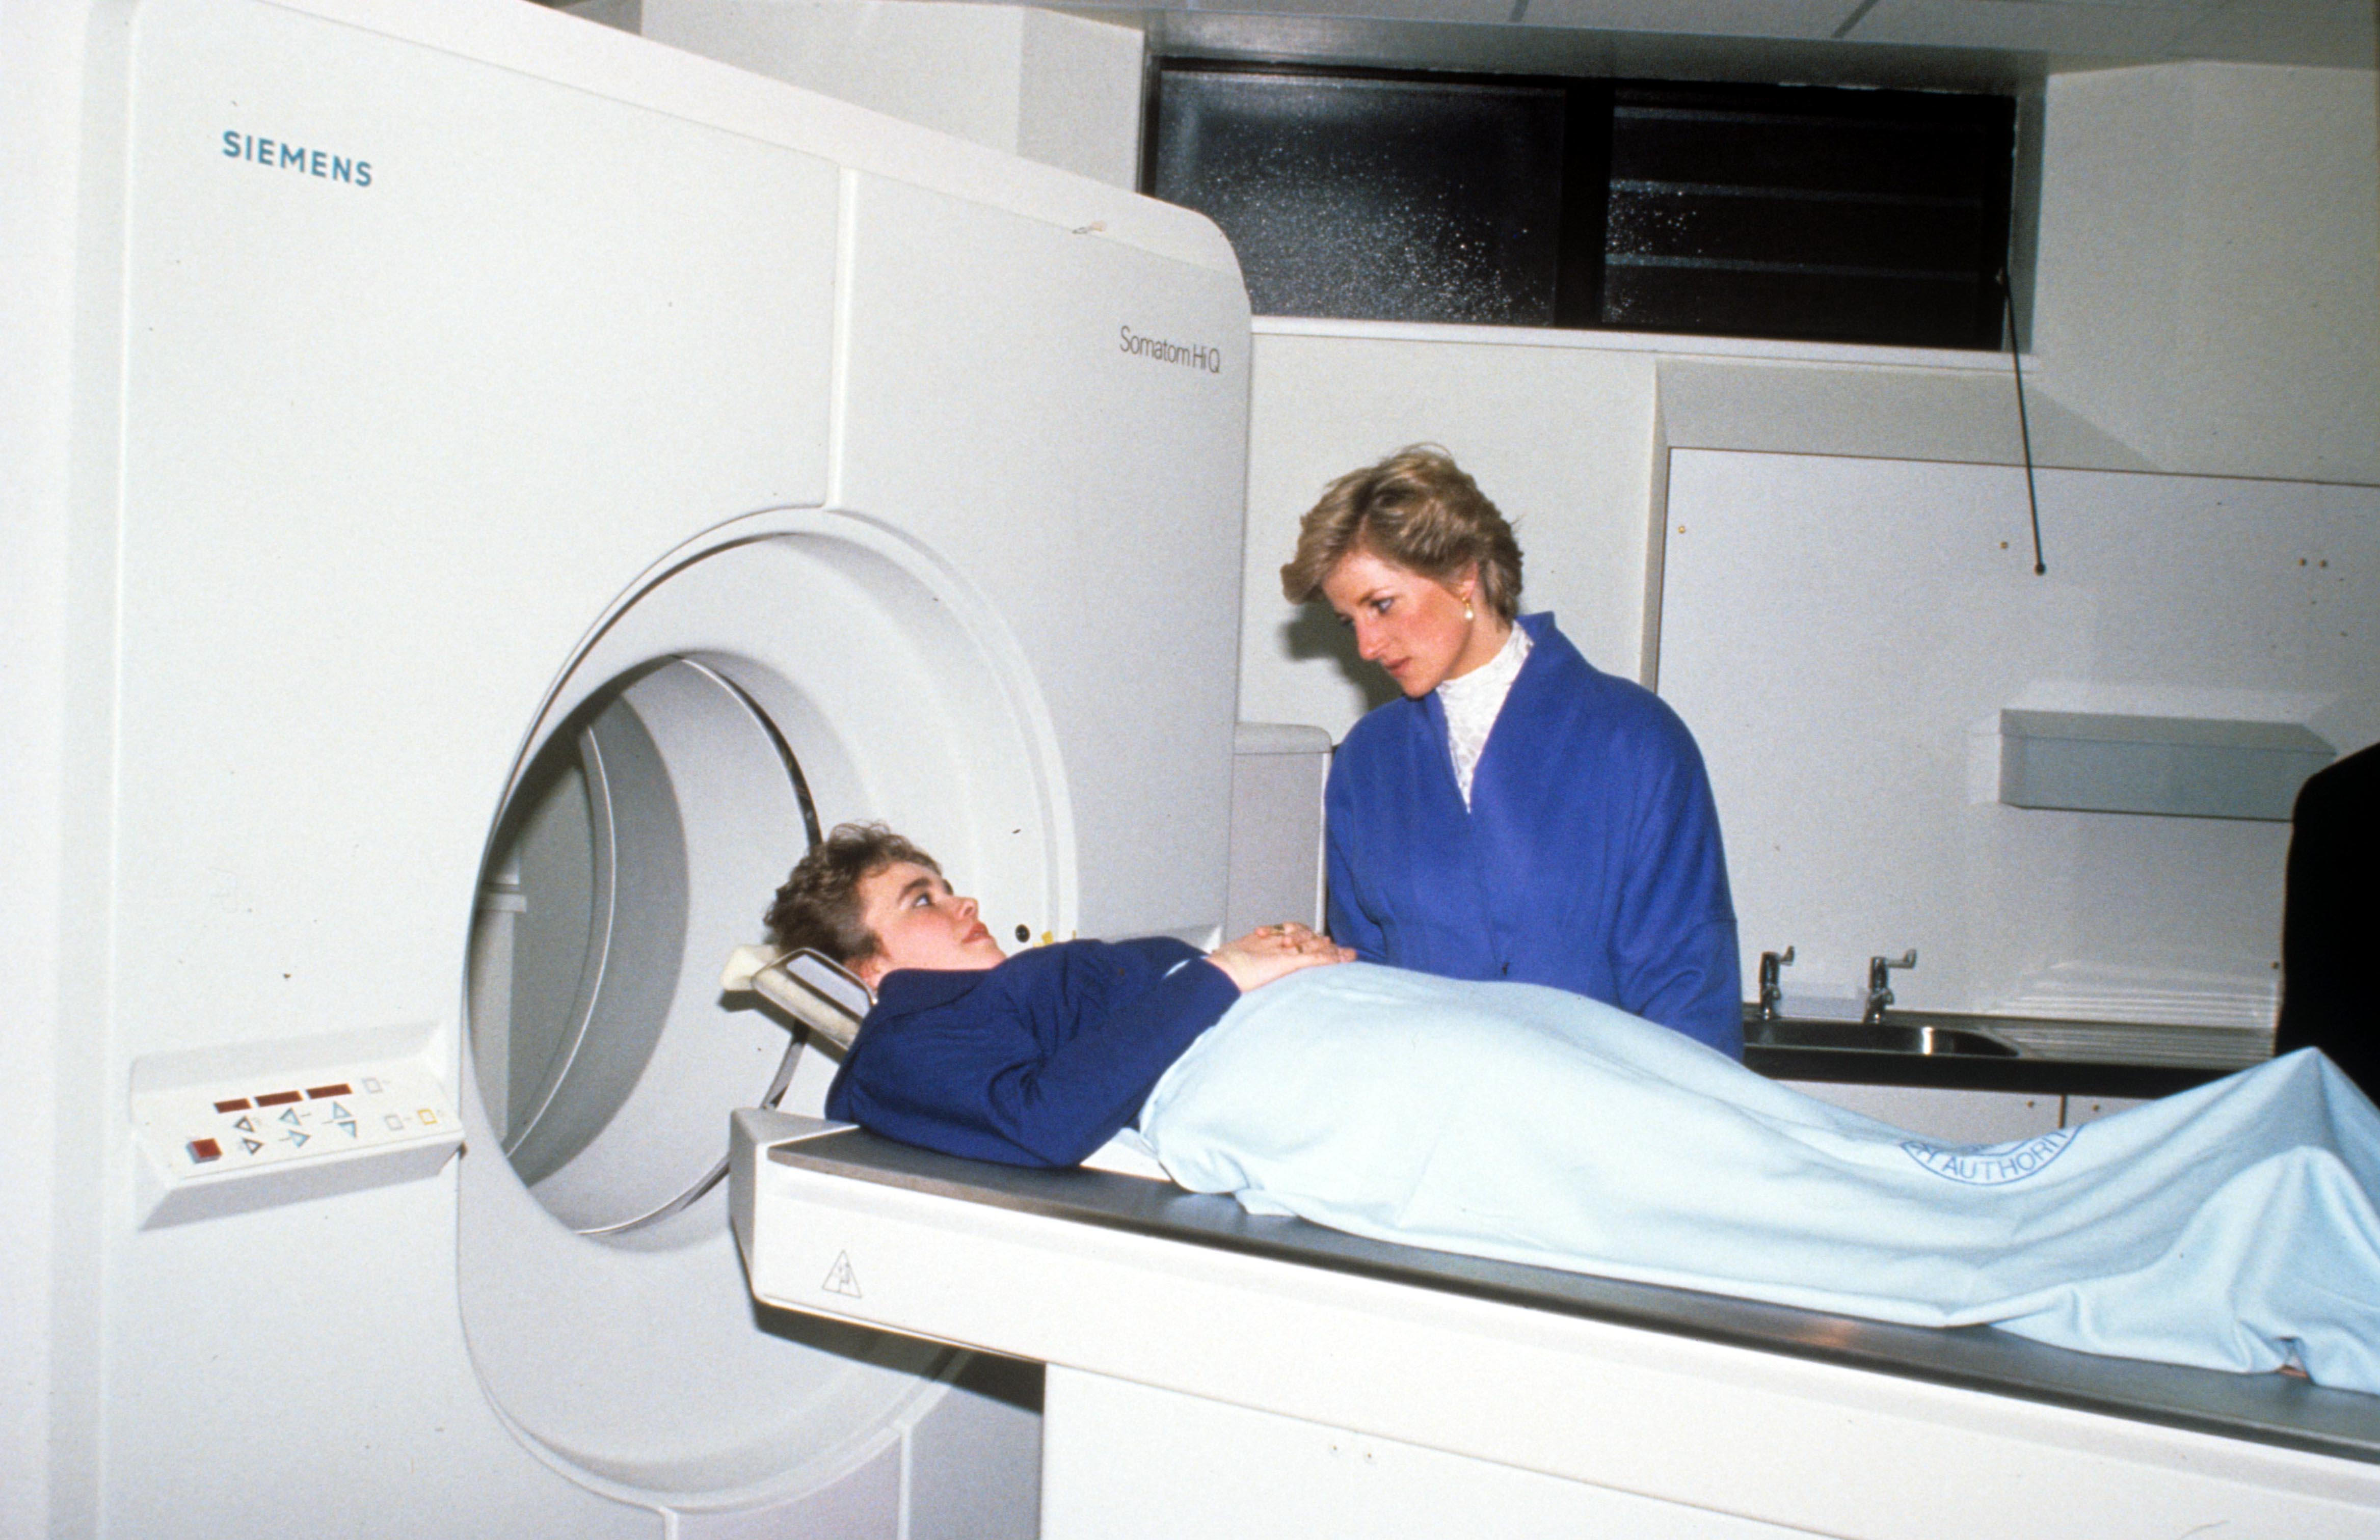 Princess Diana with a patient at the opening of the George Thomas Scanner Suite, The Princess of Wales Hospital in Bridgend, Wales in 1990.